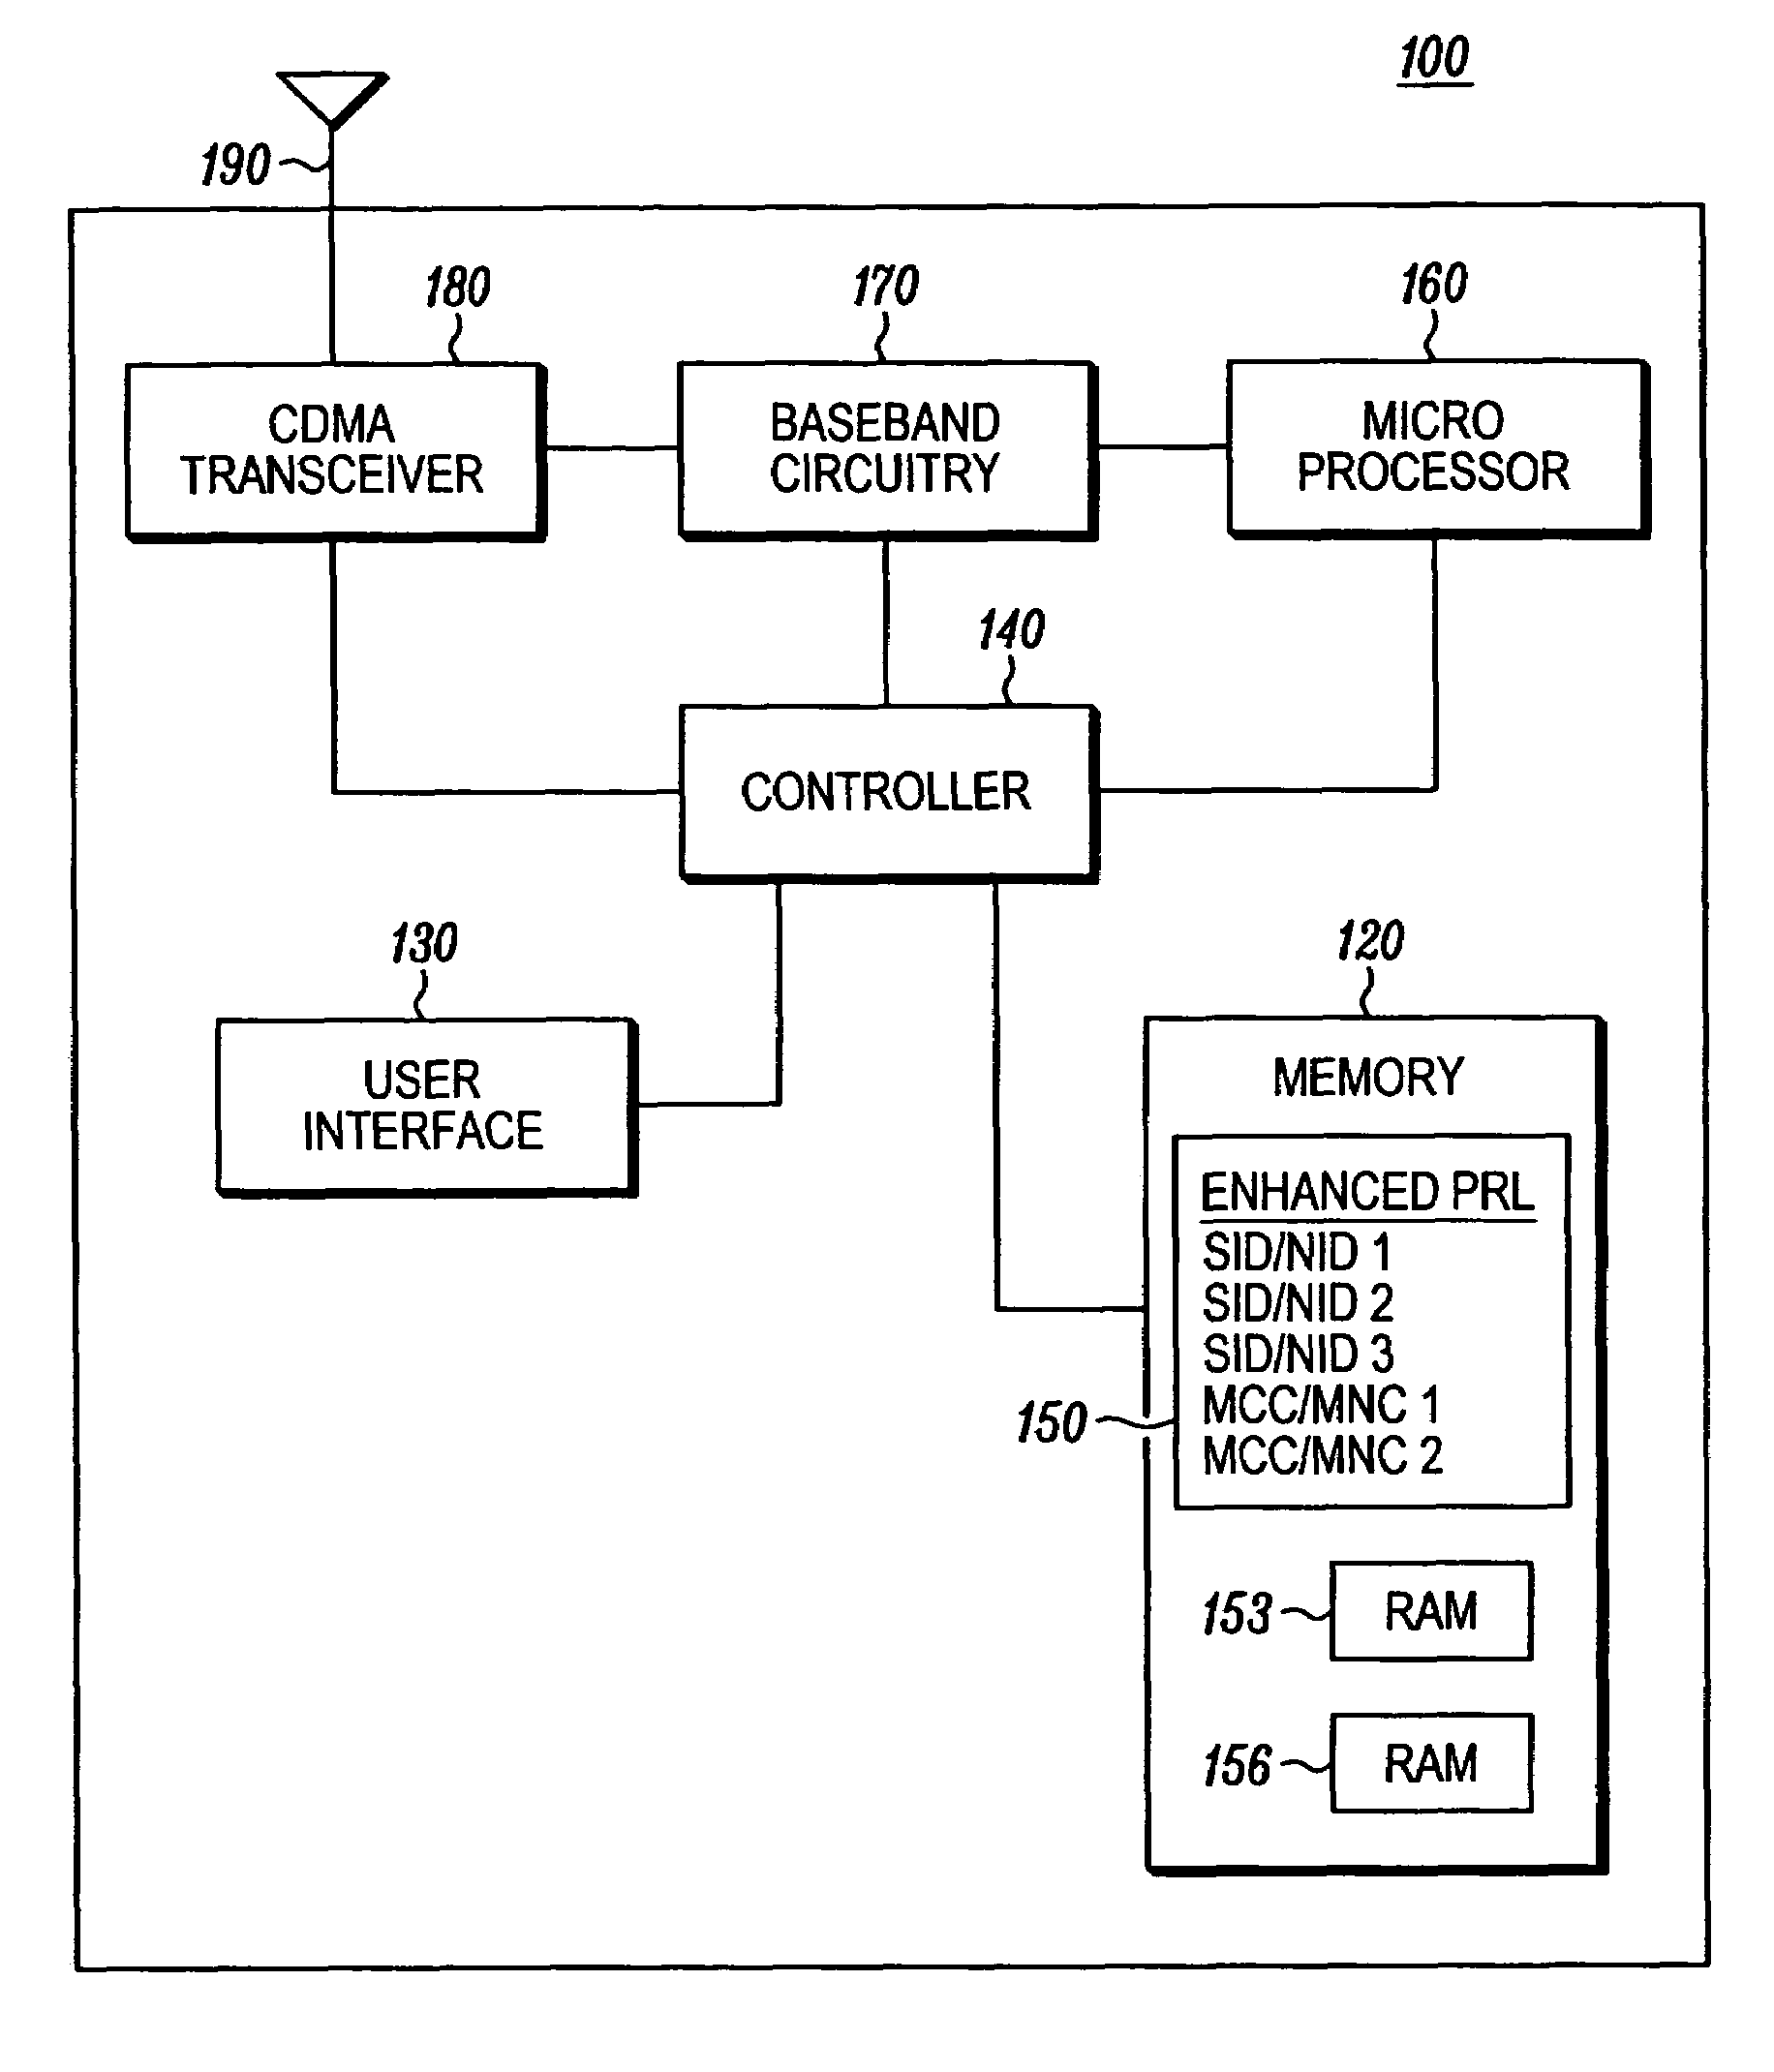 Using an enhanced preferred roaming list in a terminal device